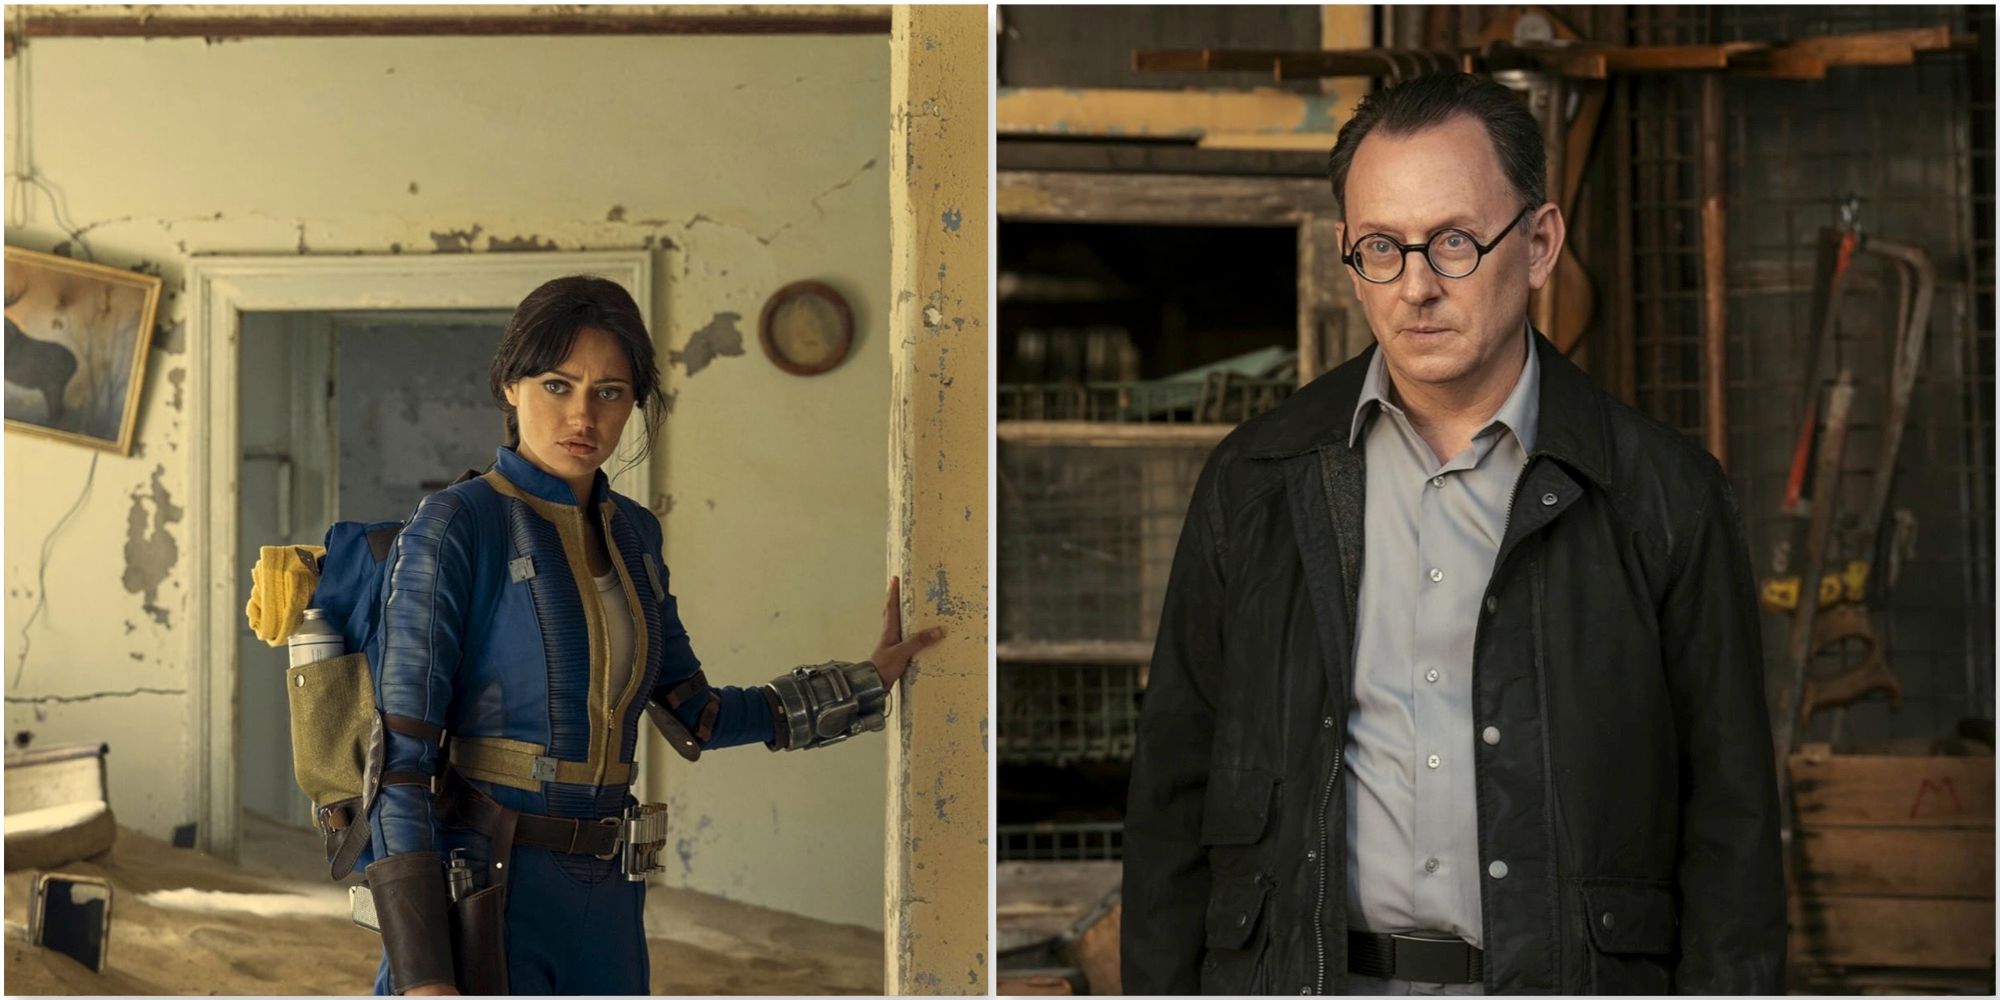 Lucy and Dr. Wilzig in Amazon’s Fallout Show